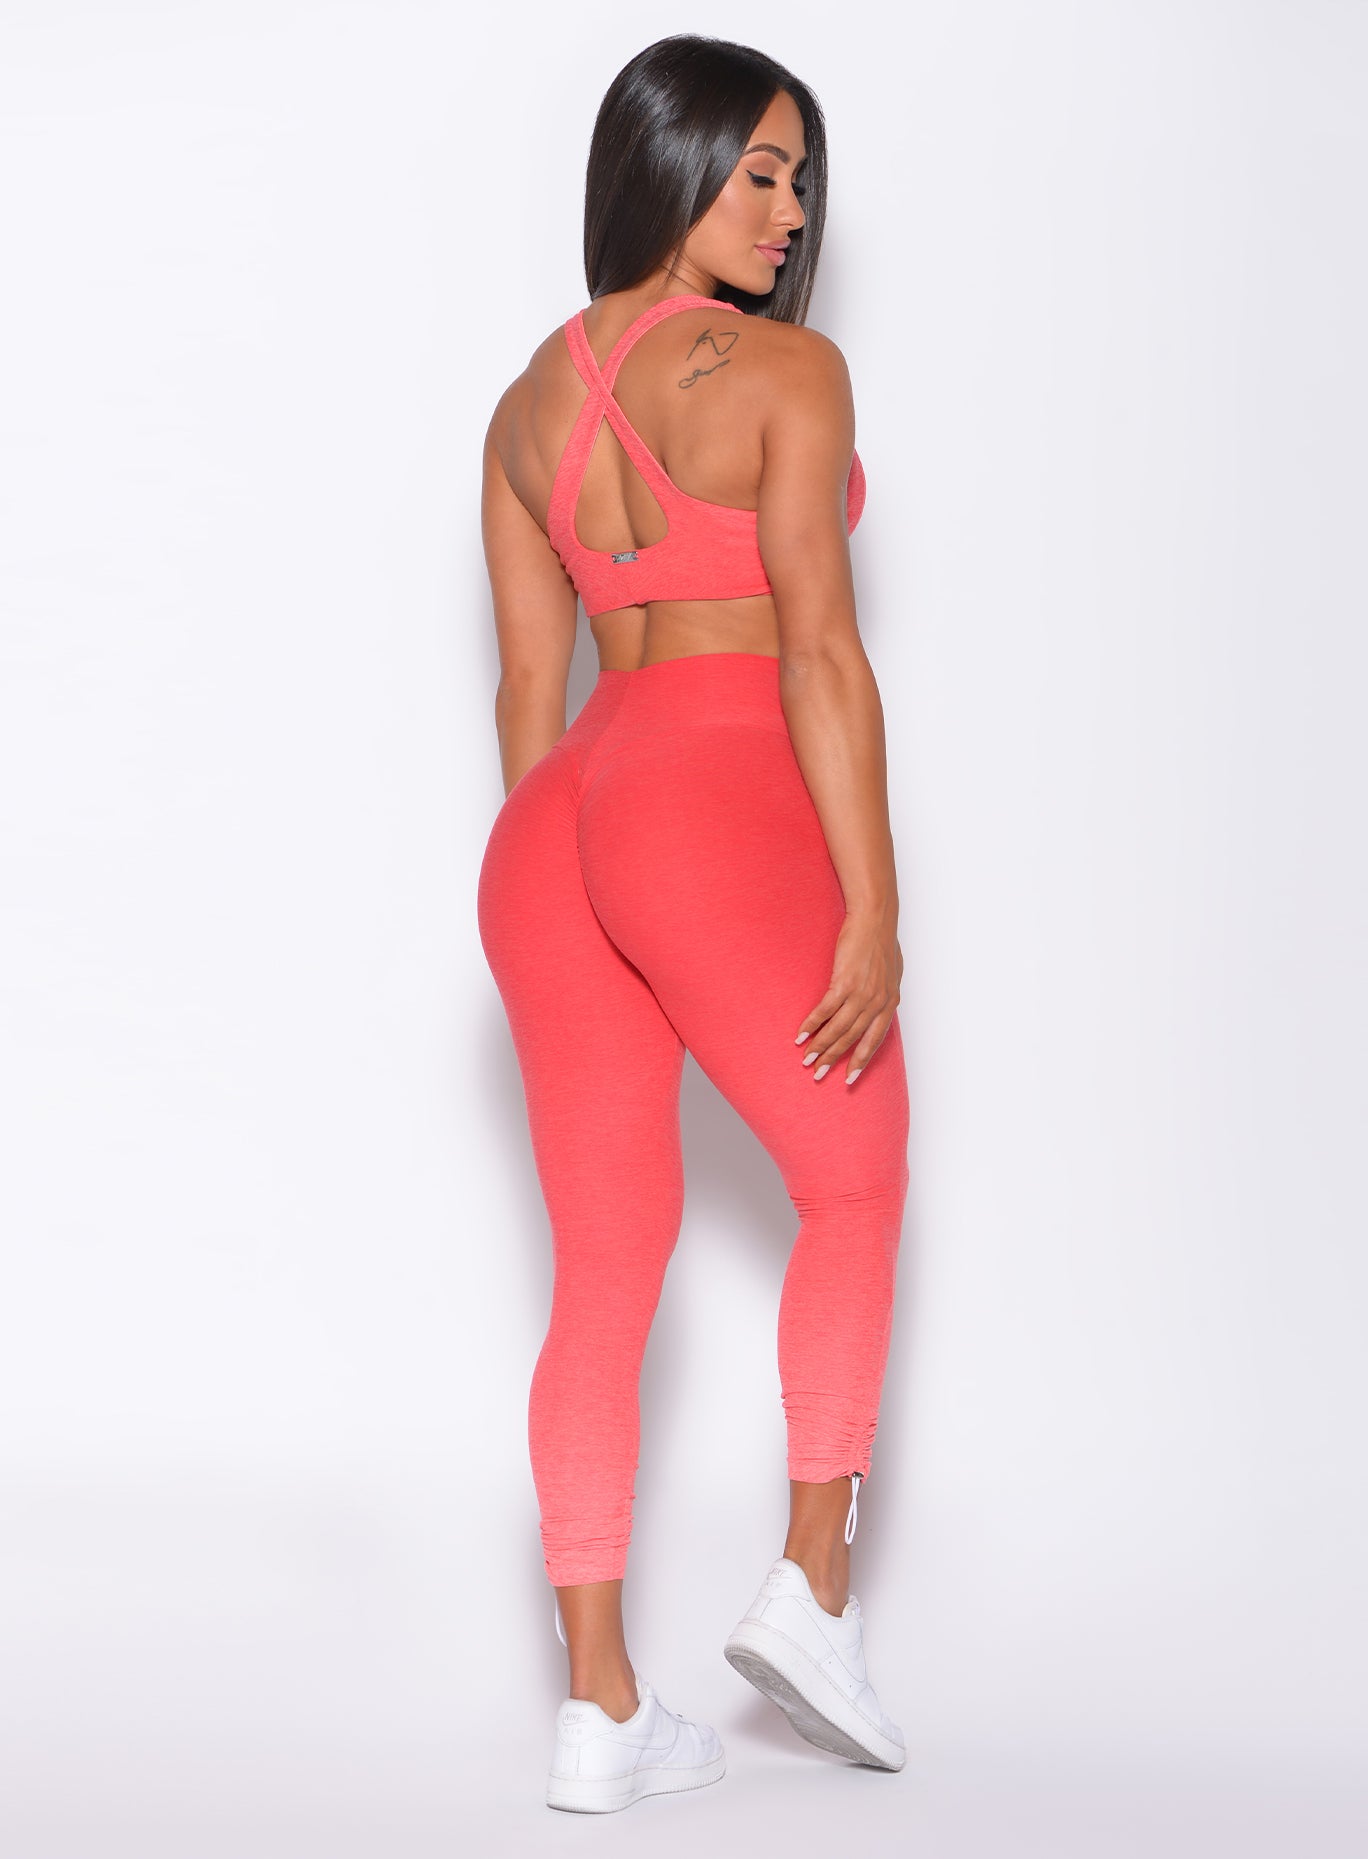 Back profile view of a model facing to her right wearing our toggle leggings in Ombre Fiji Coral and a matching bra